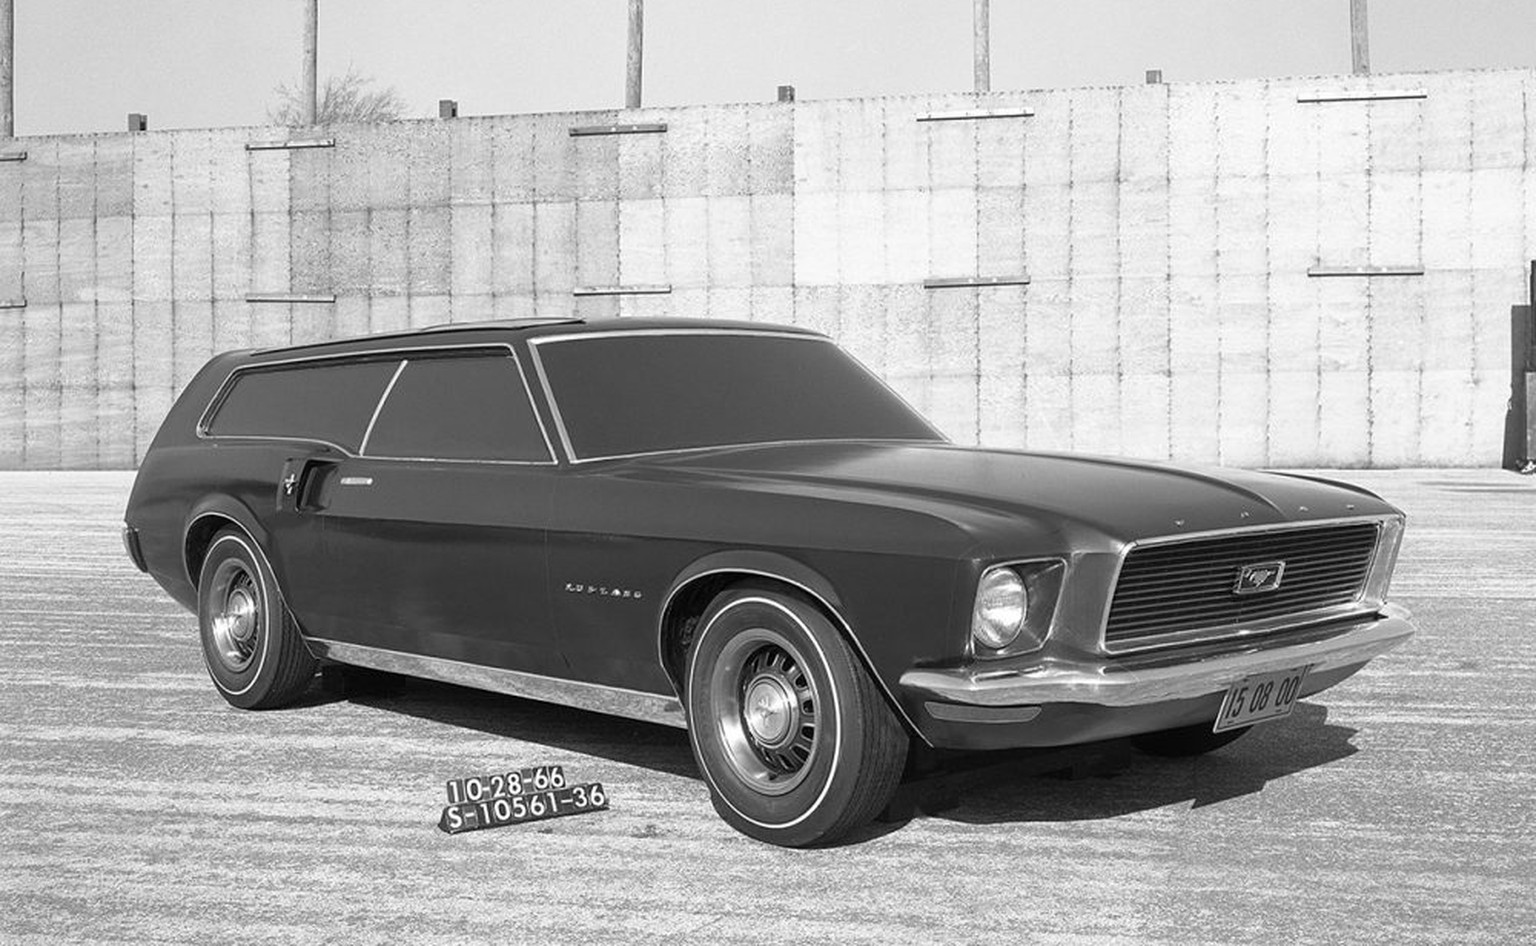 Ford Mustang Shooting Brake Prototyp 1966 auto retro https://petrolicious.com/articles/the-mustang-shooting-brake-that-never-was